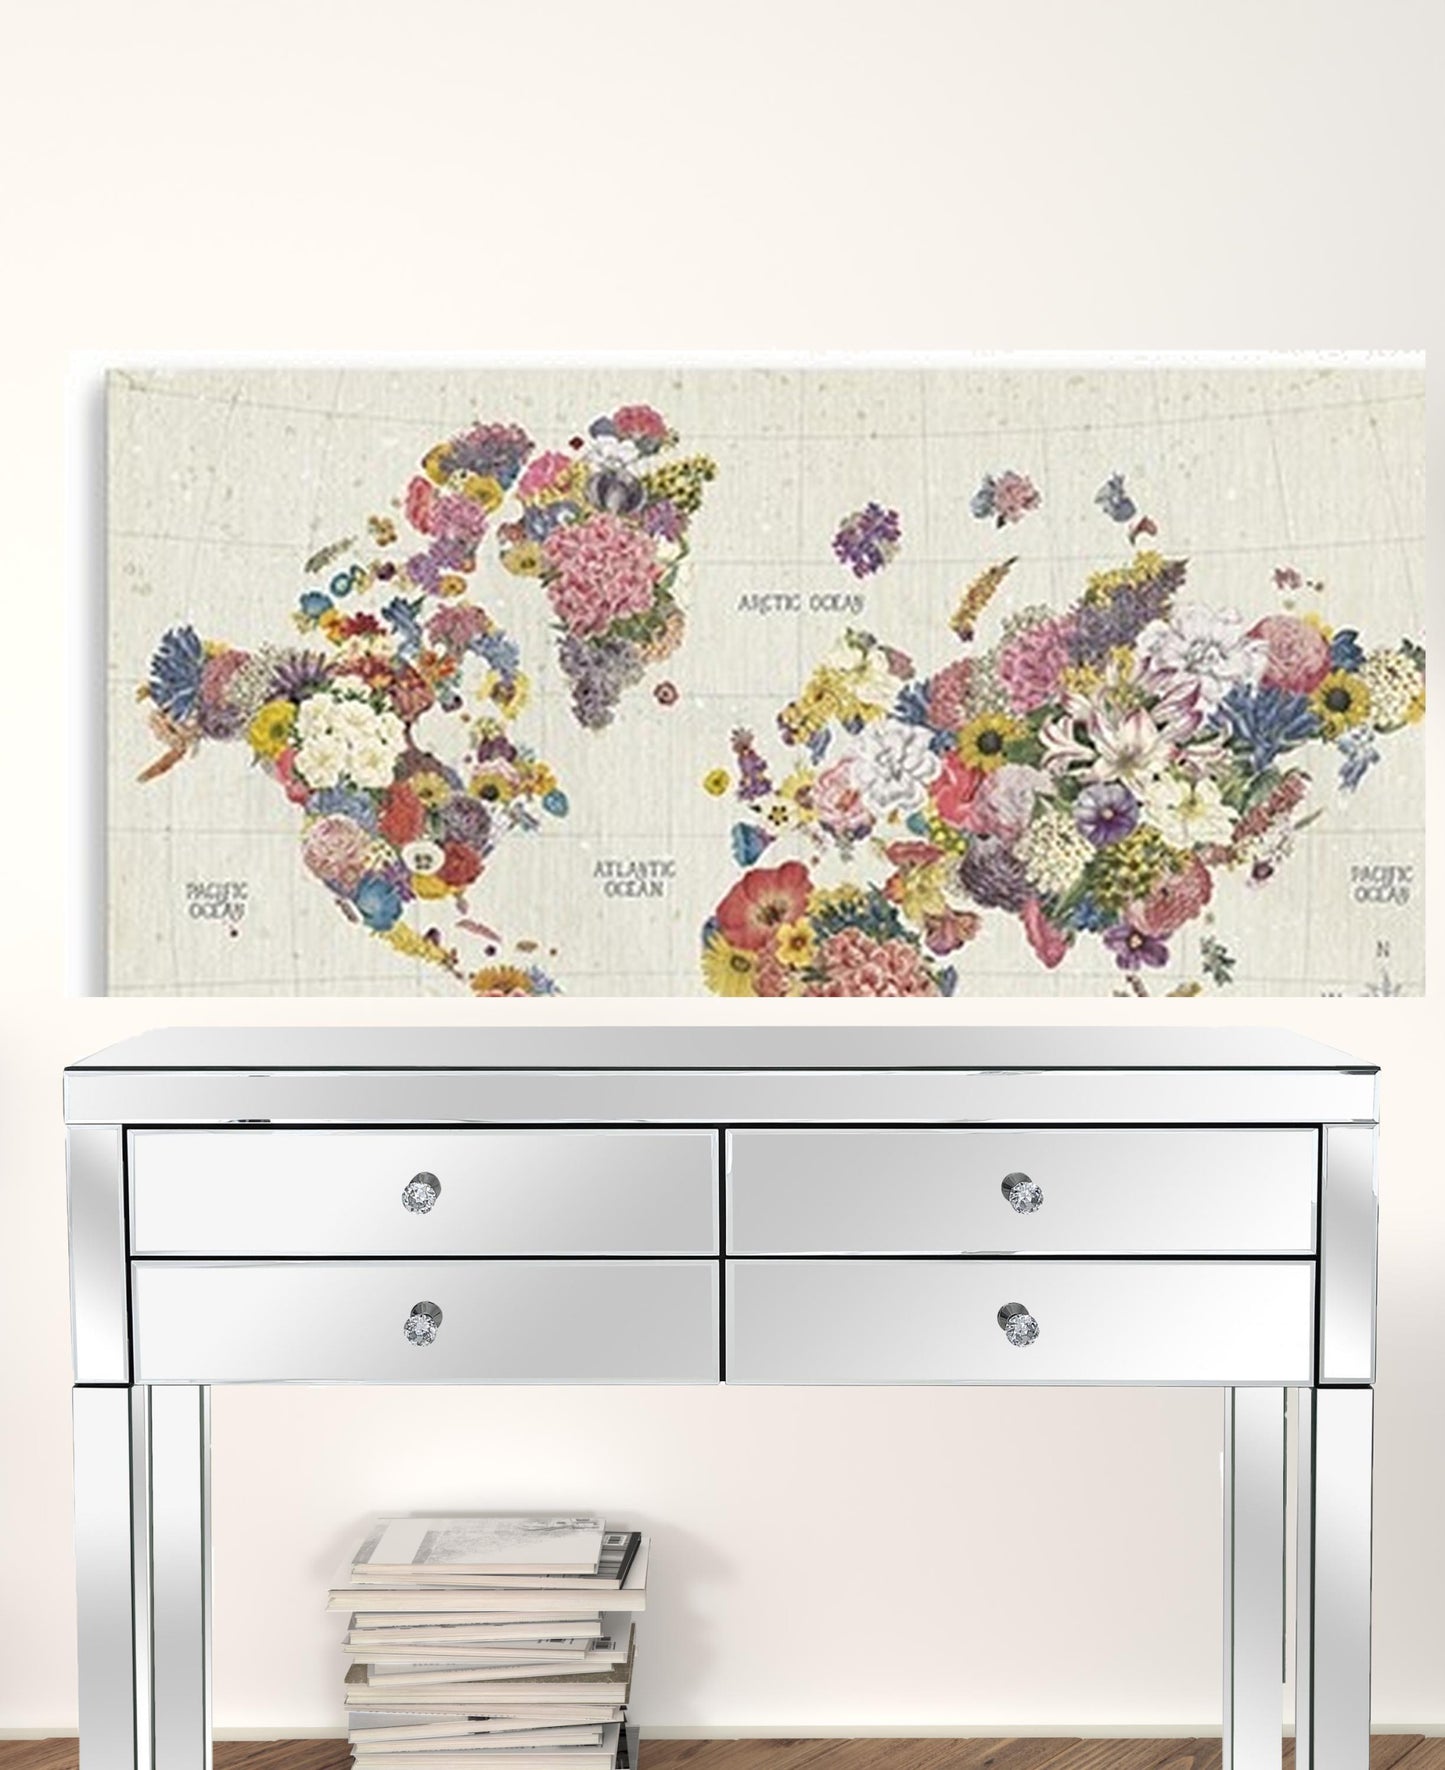 24" x 16" Fun Floral Map of the World Canvas Wall Art